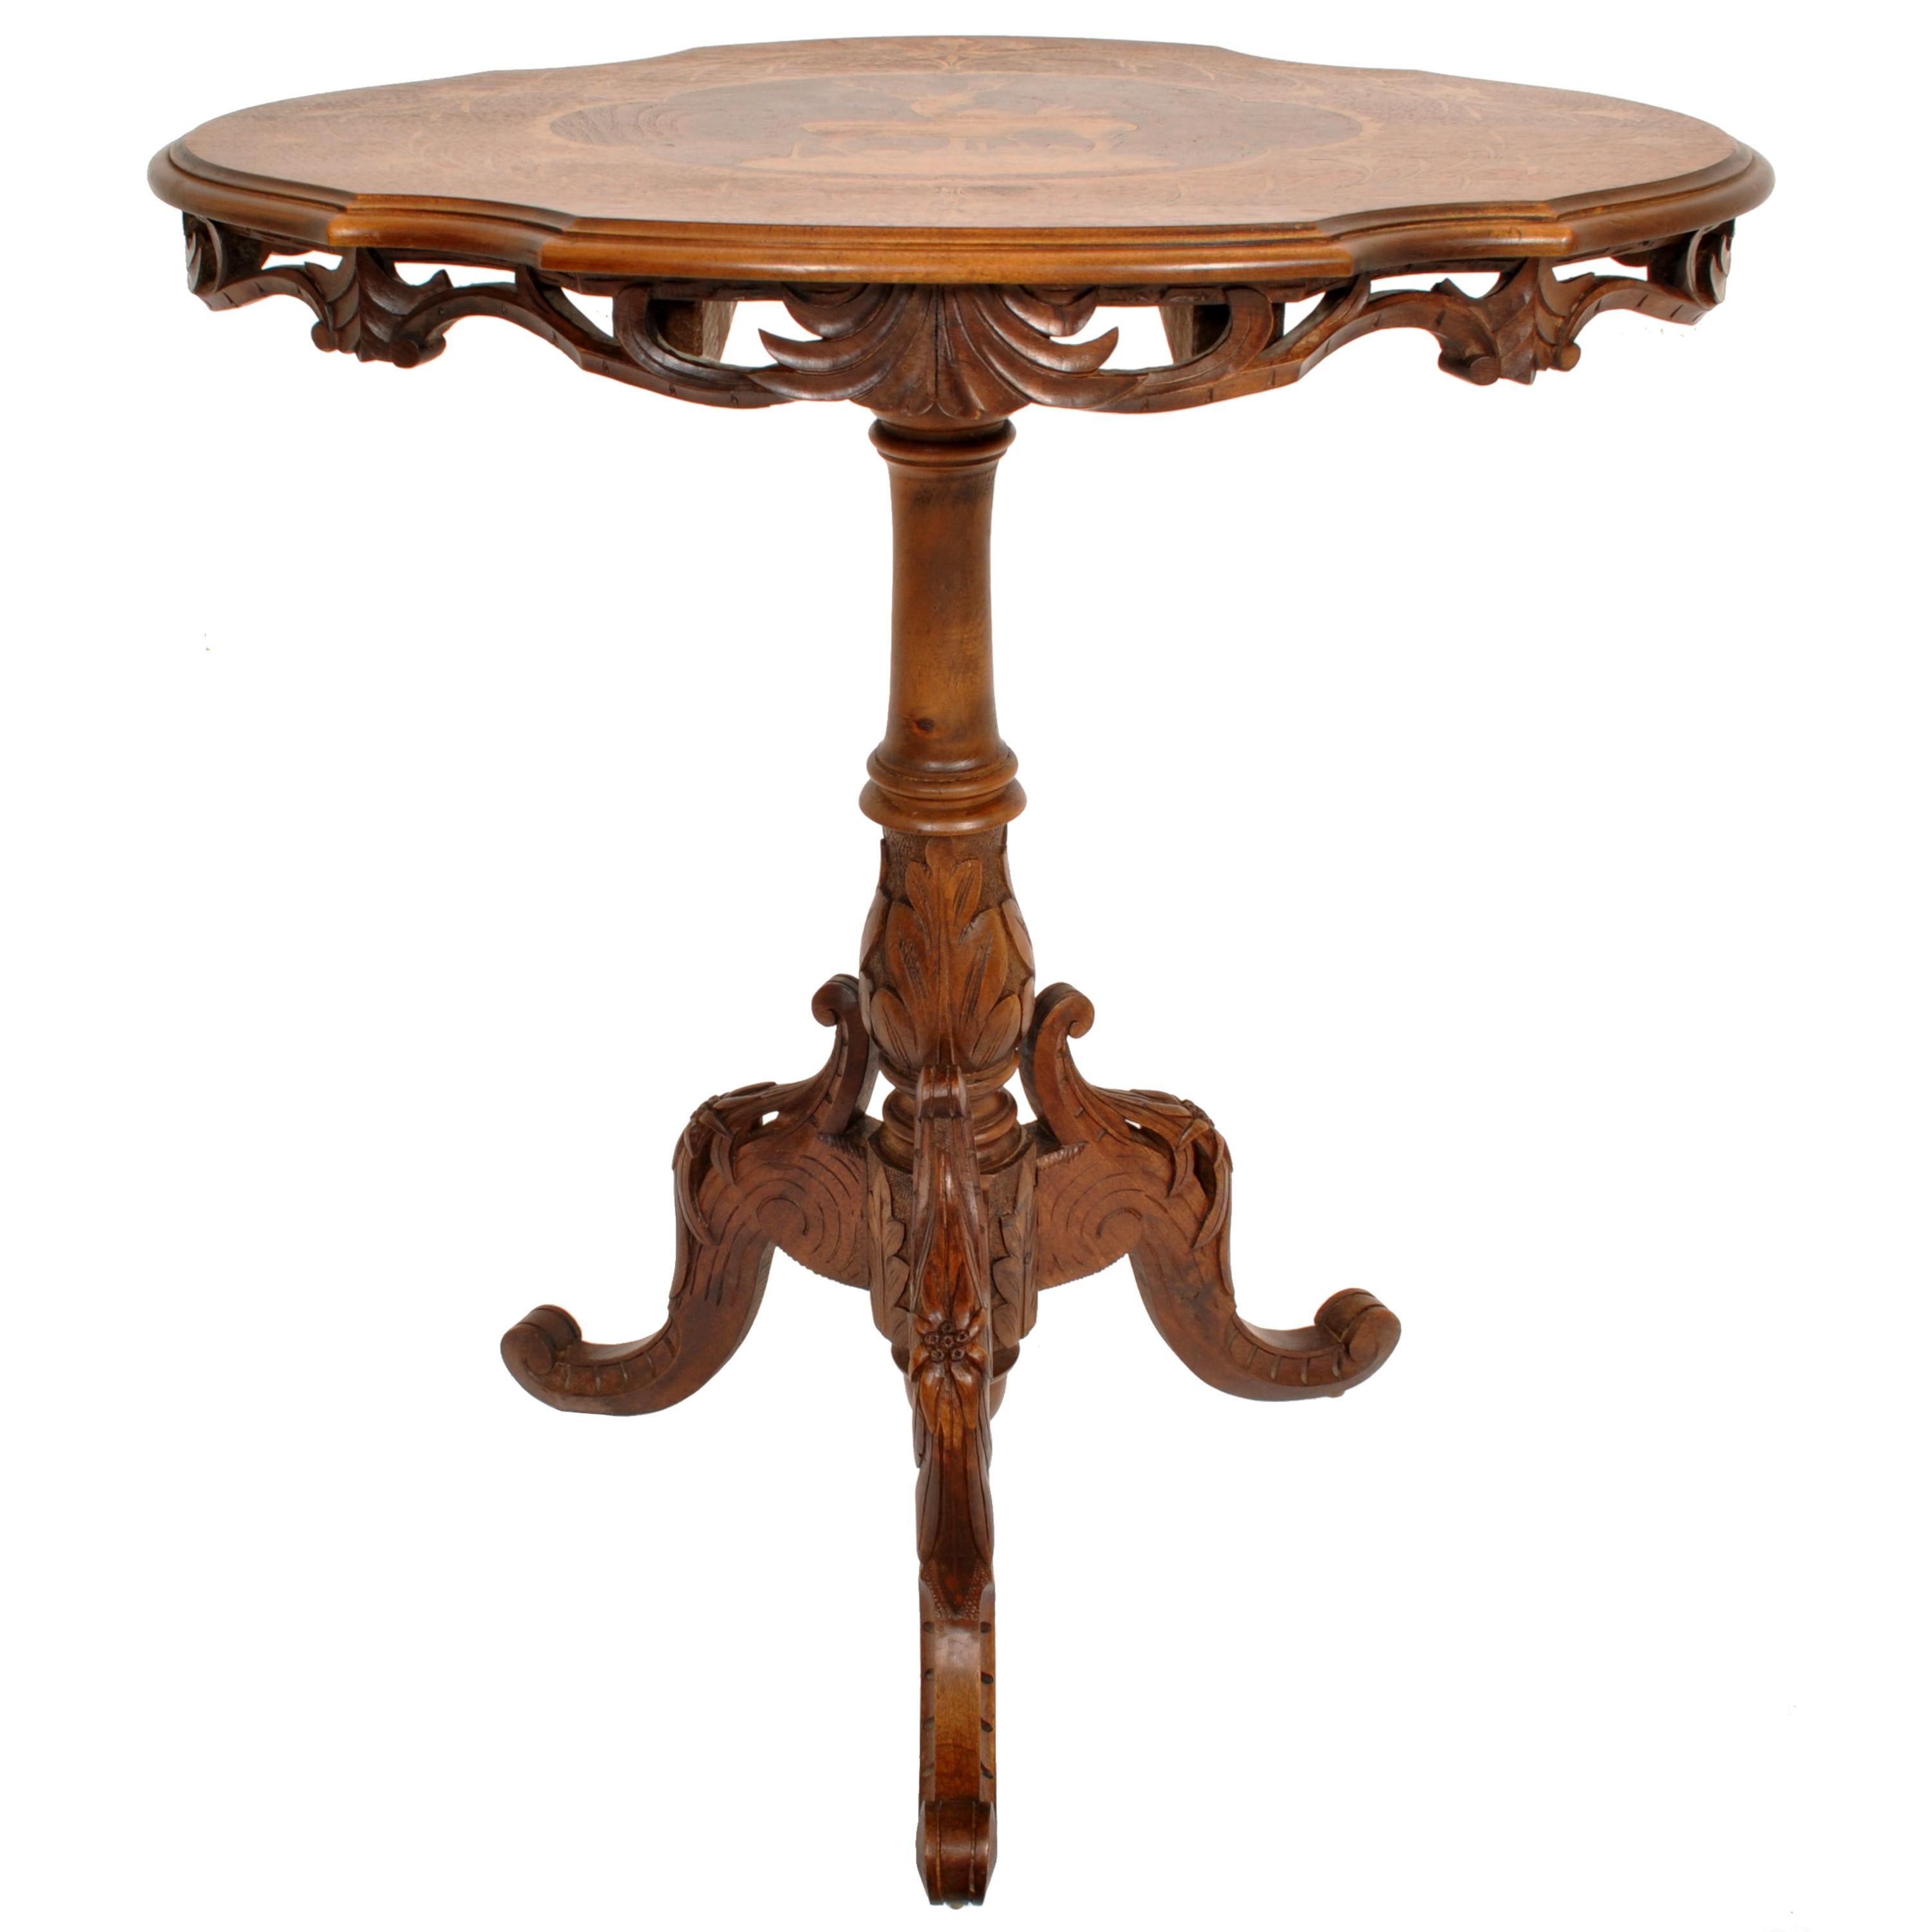 Fruitwood Antique Swiss Black Forest Carved Inlaid Walnut Marquetry Tilt-Top Table, 1870